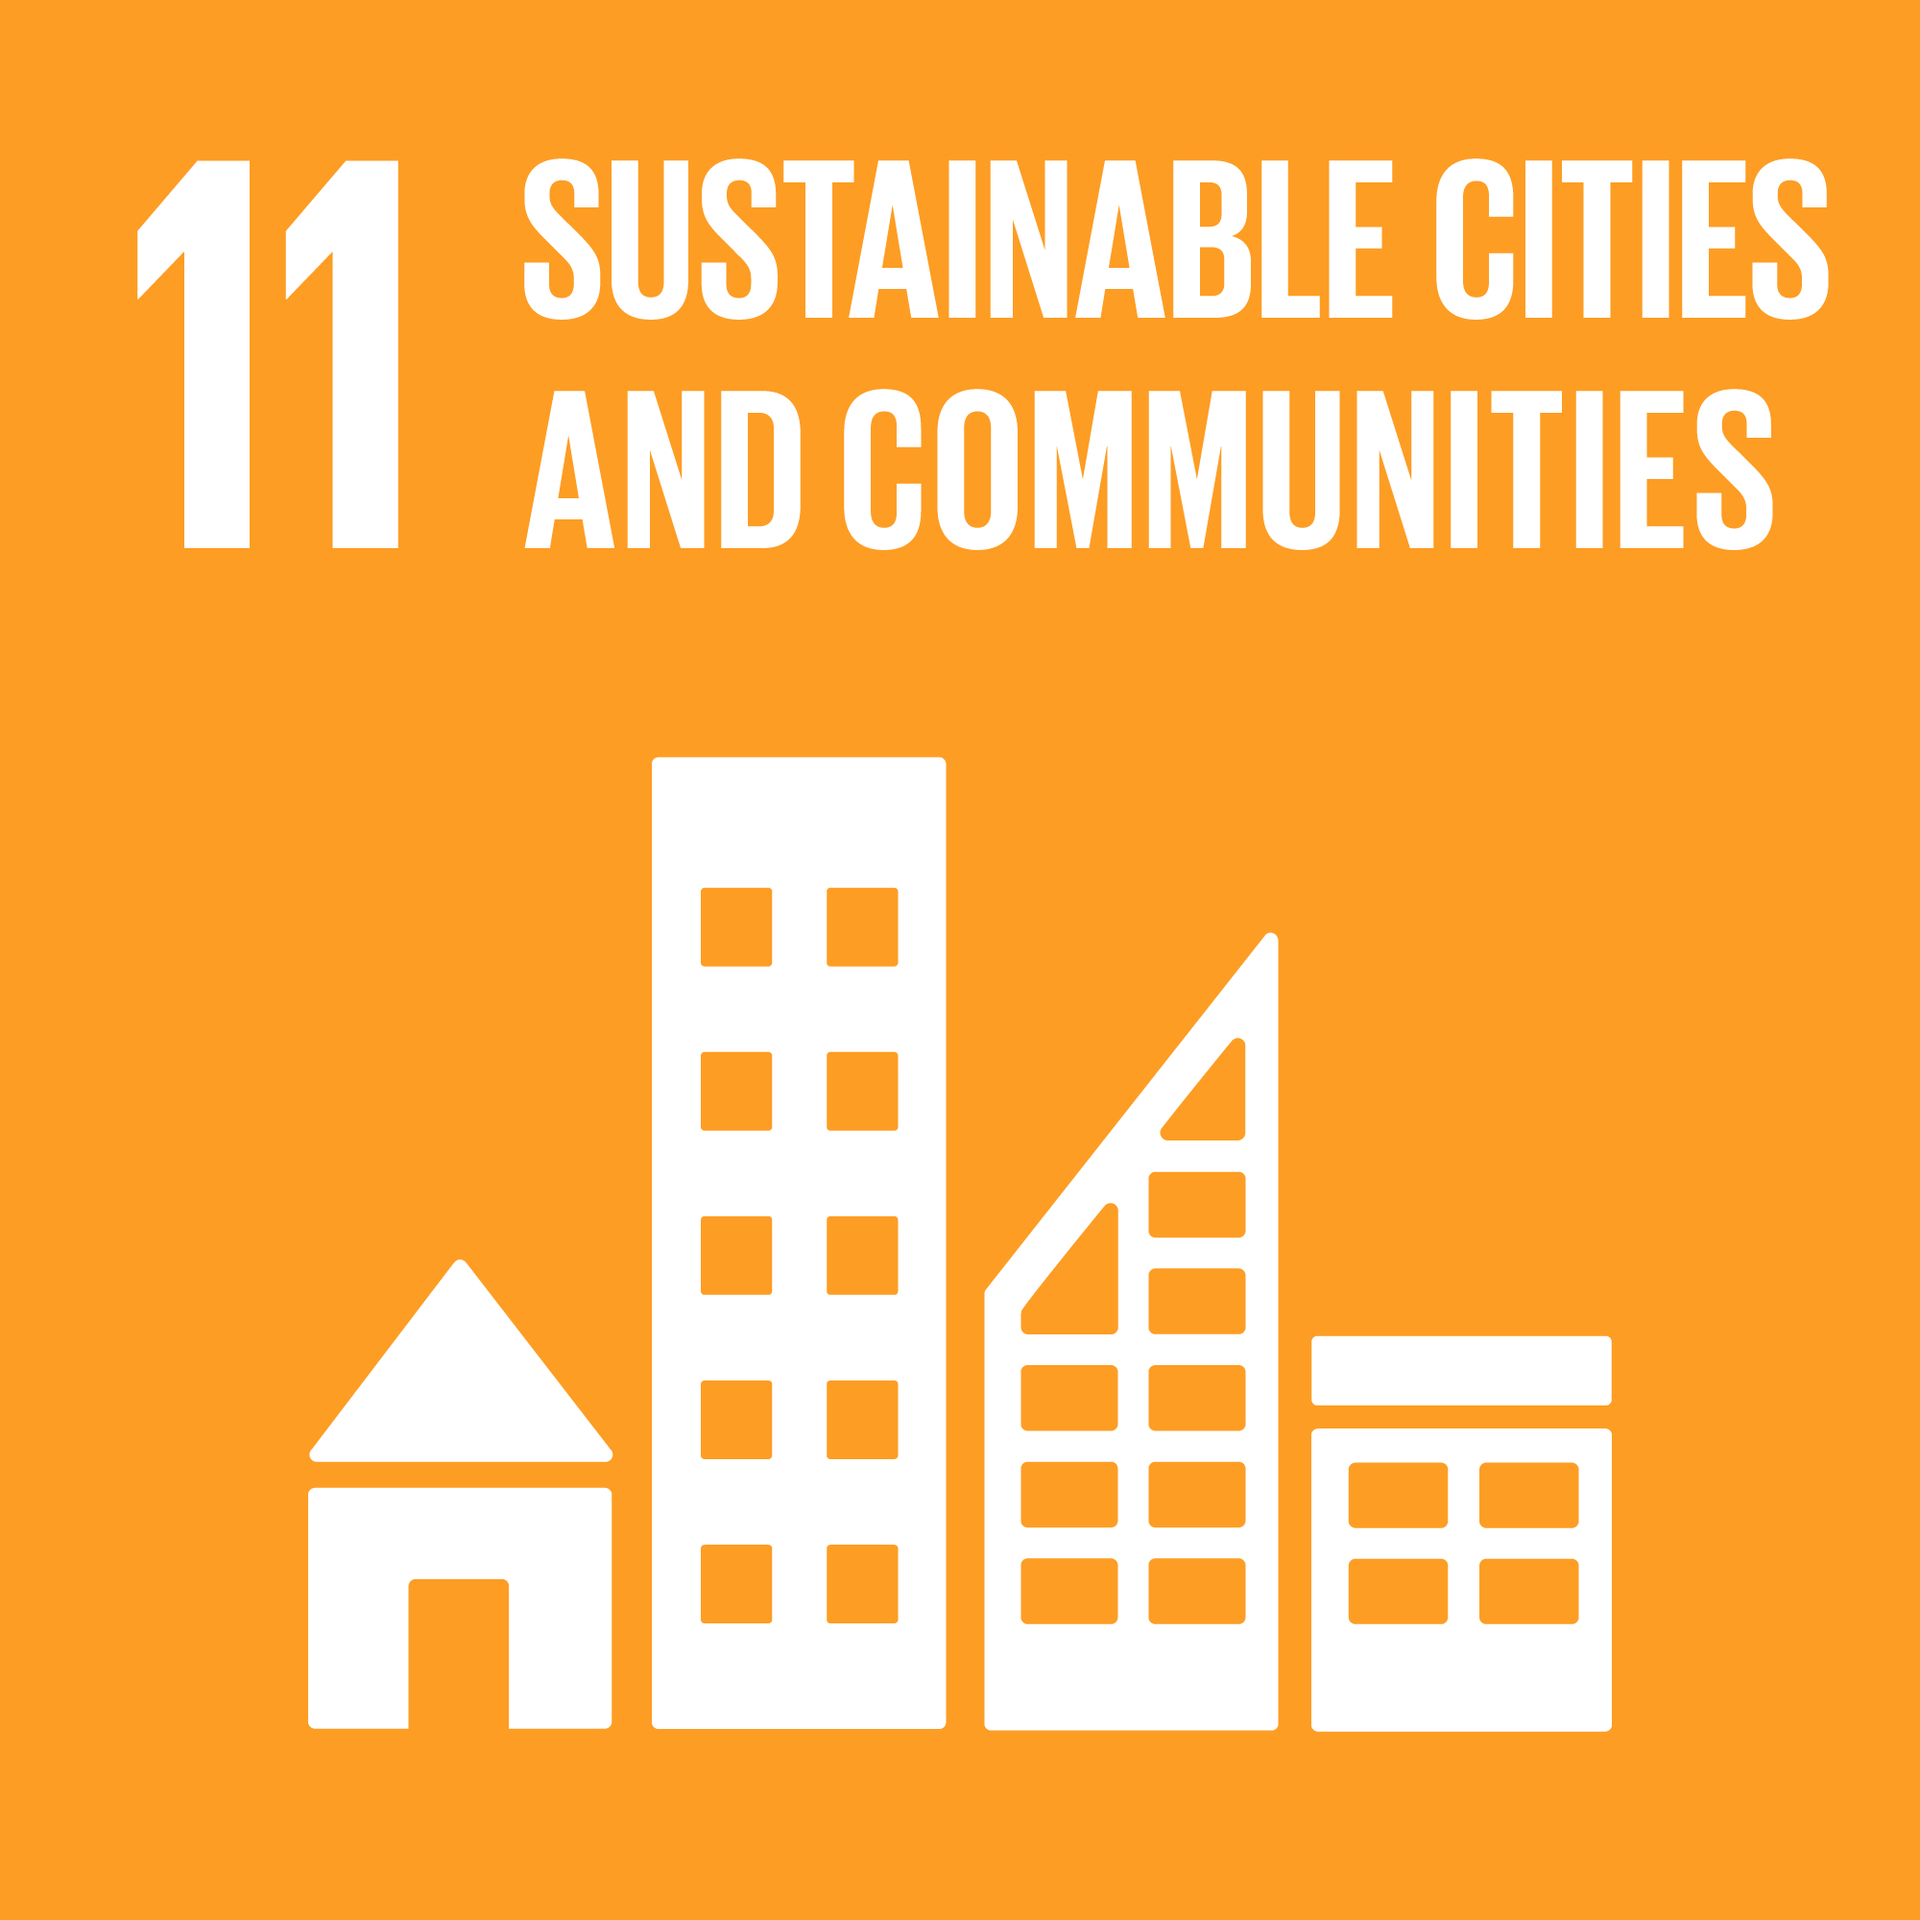 An orange background with a white icon of buildings and the words `` sustainable cities and communities ''.